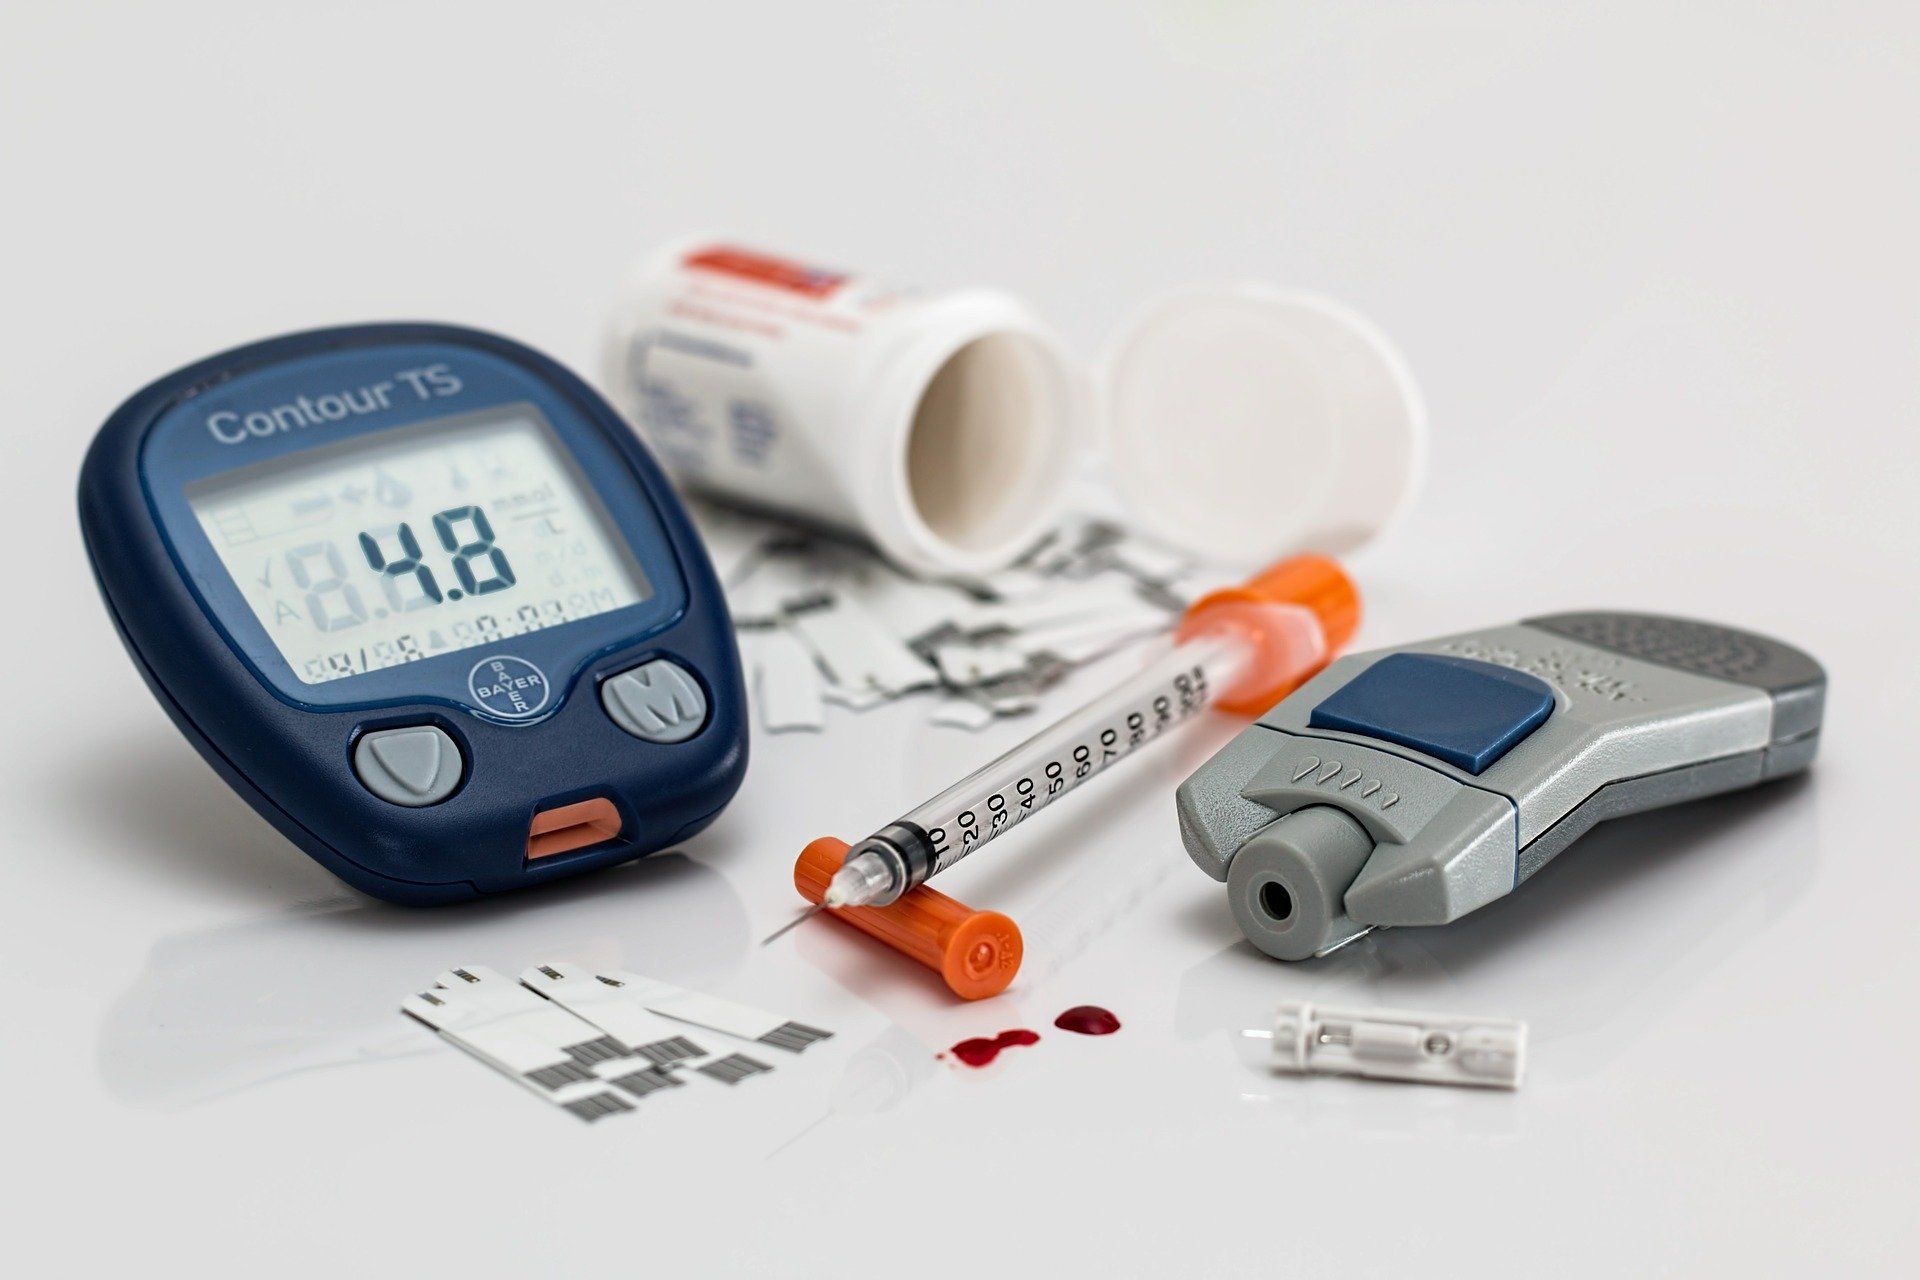 High Blood Sugar Levels Even Without Diabetes Can Raise Risk Of Heart Disease: Study